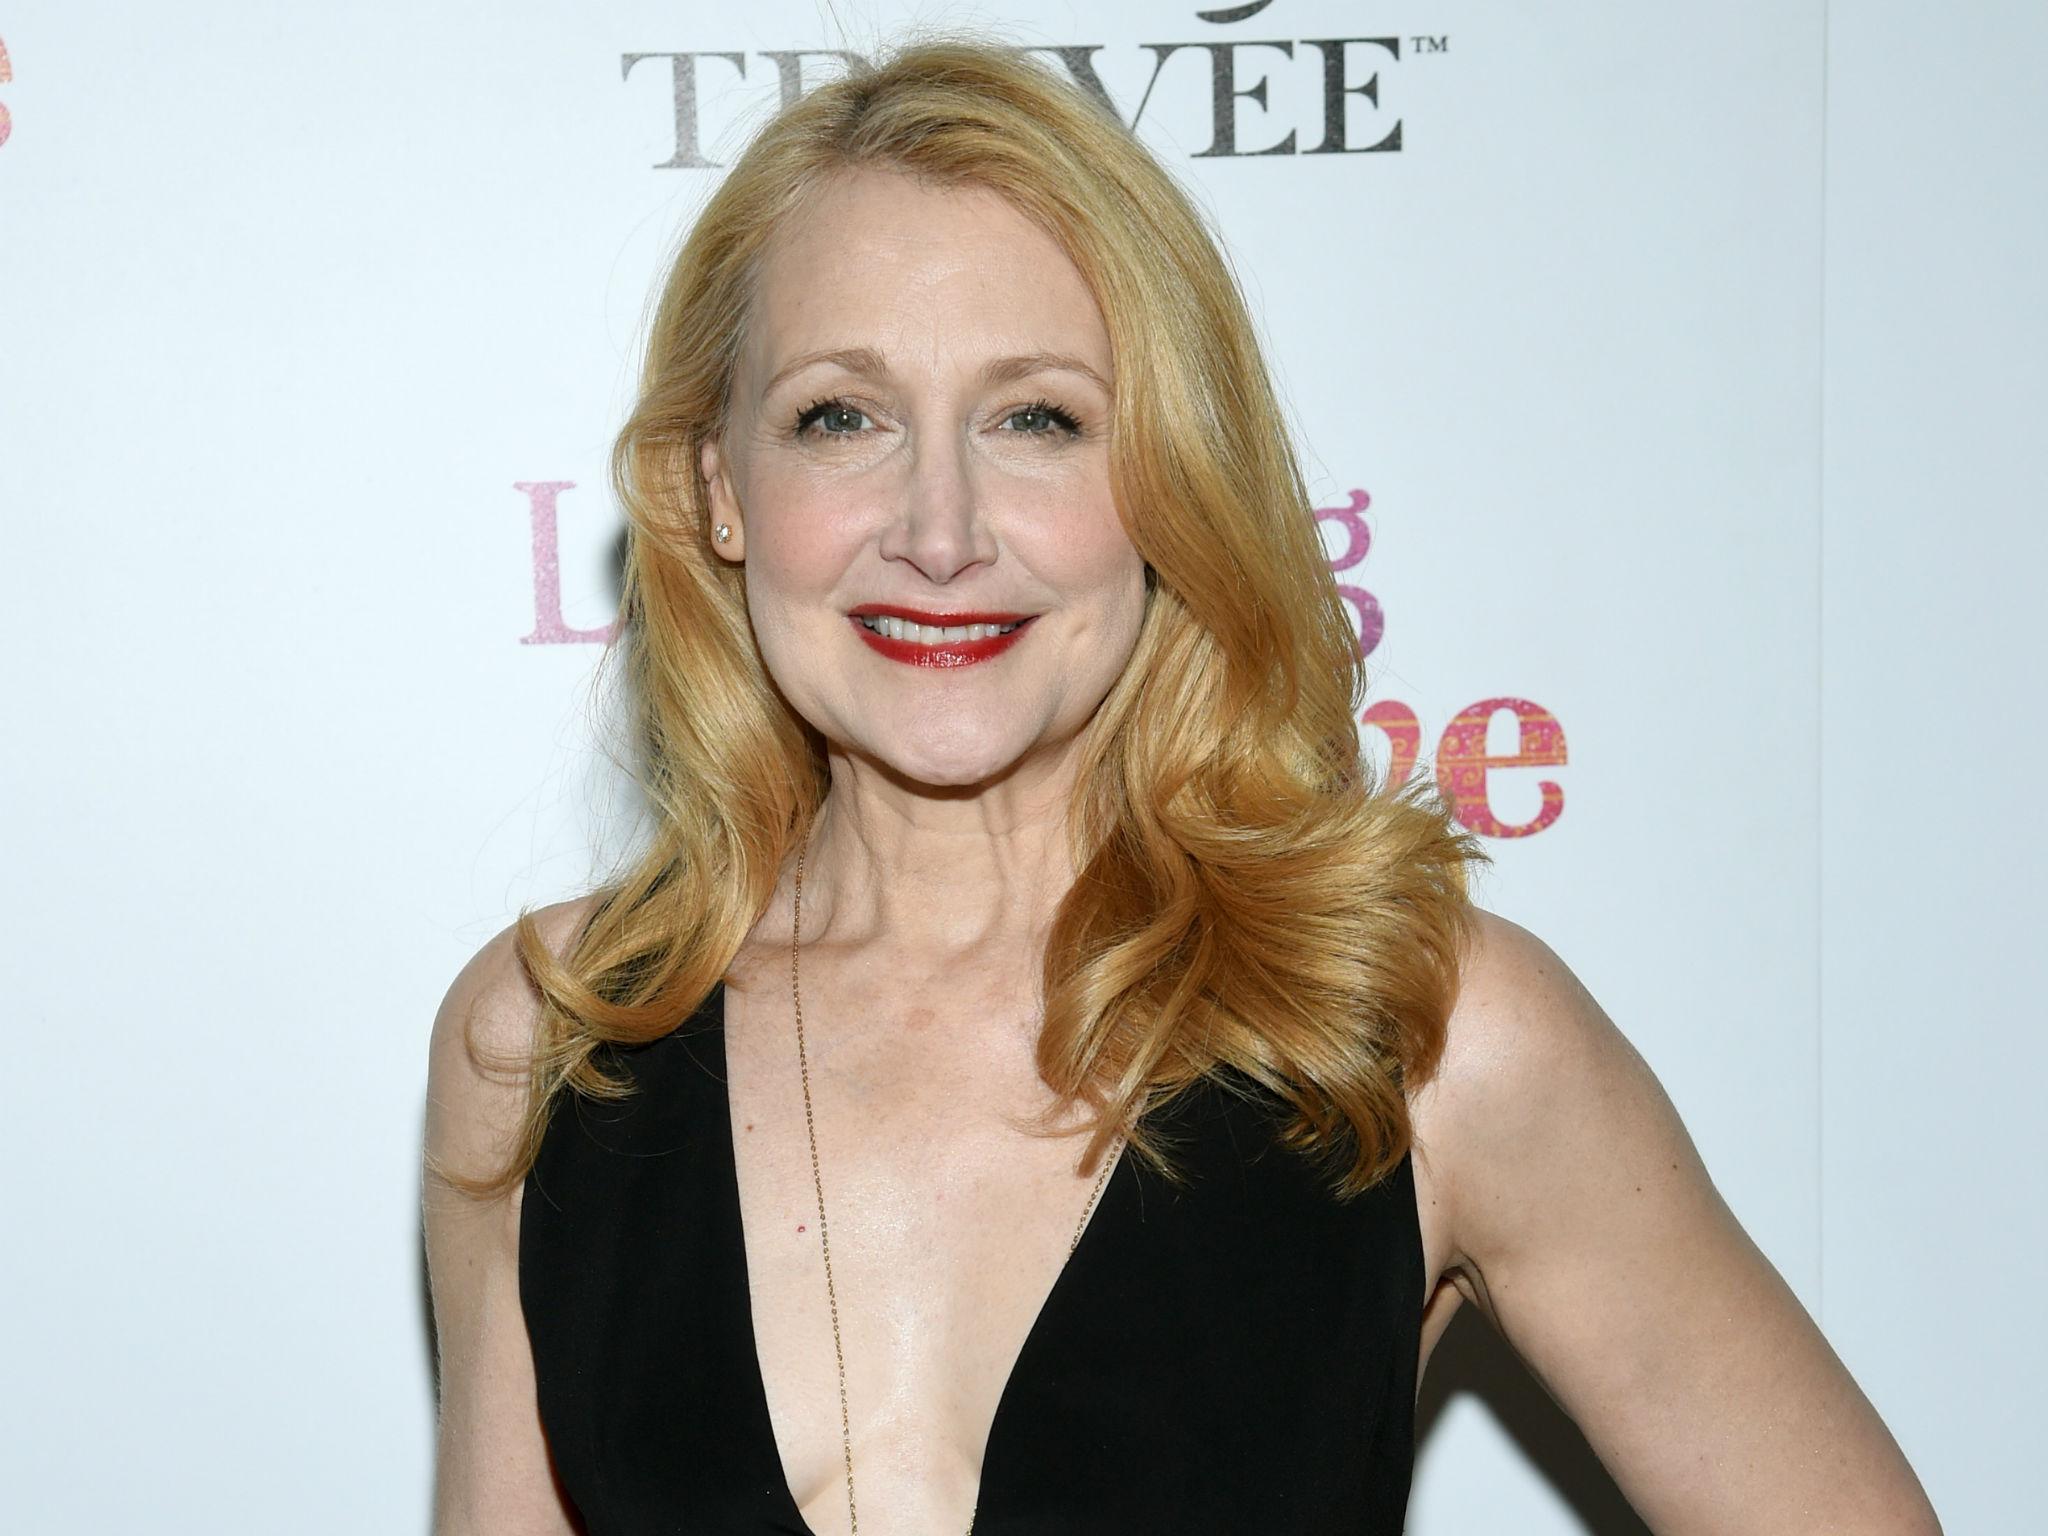 Best Performance by an Actress in a Supporting Role in a Series, Limited Series or Motion Picture Made for Television: Patricia Clarkson (Sharp Objects)